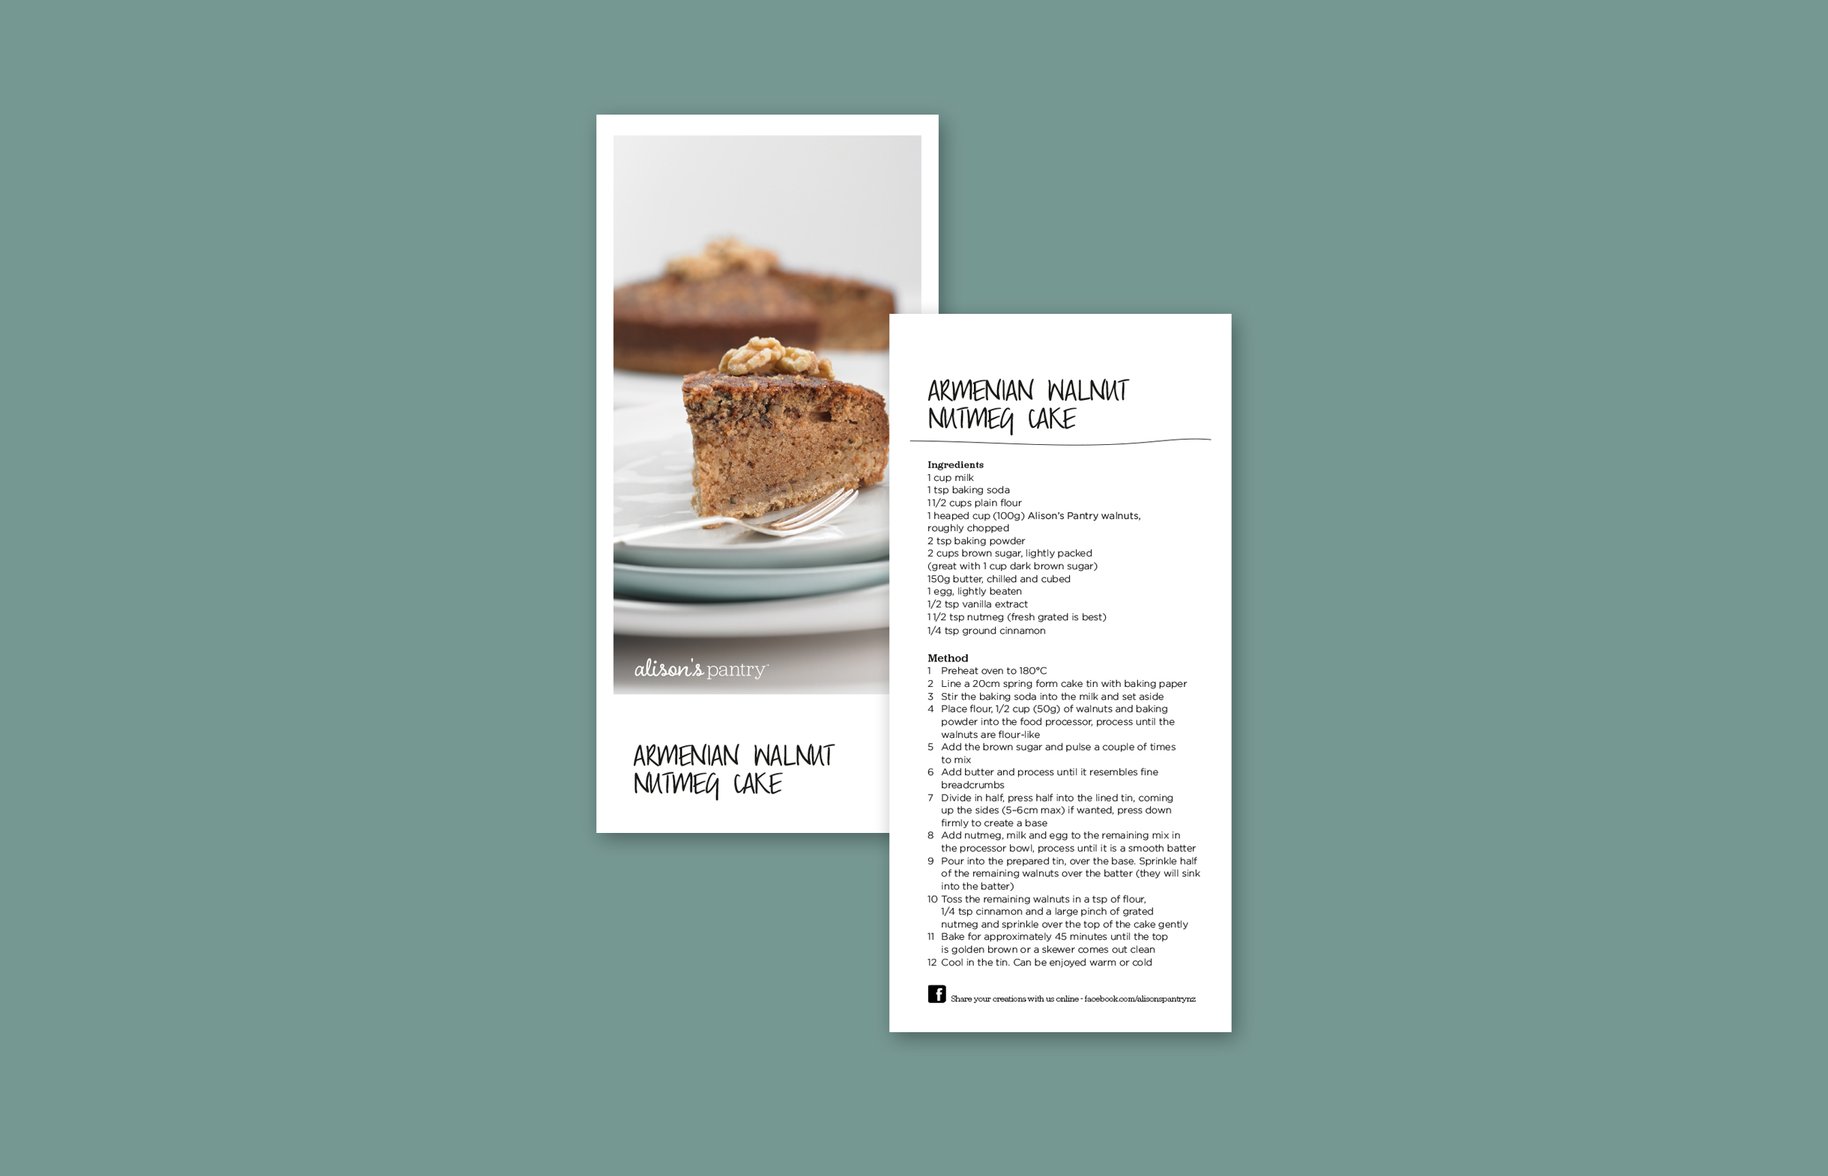 Alison's Pantry recipe cards